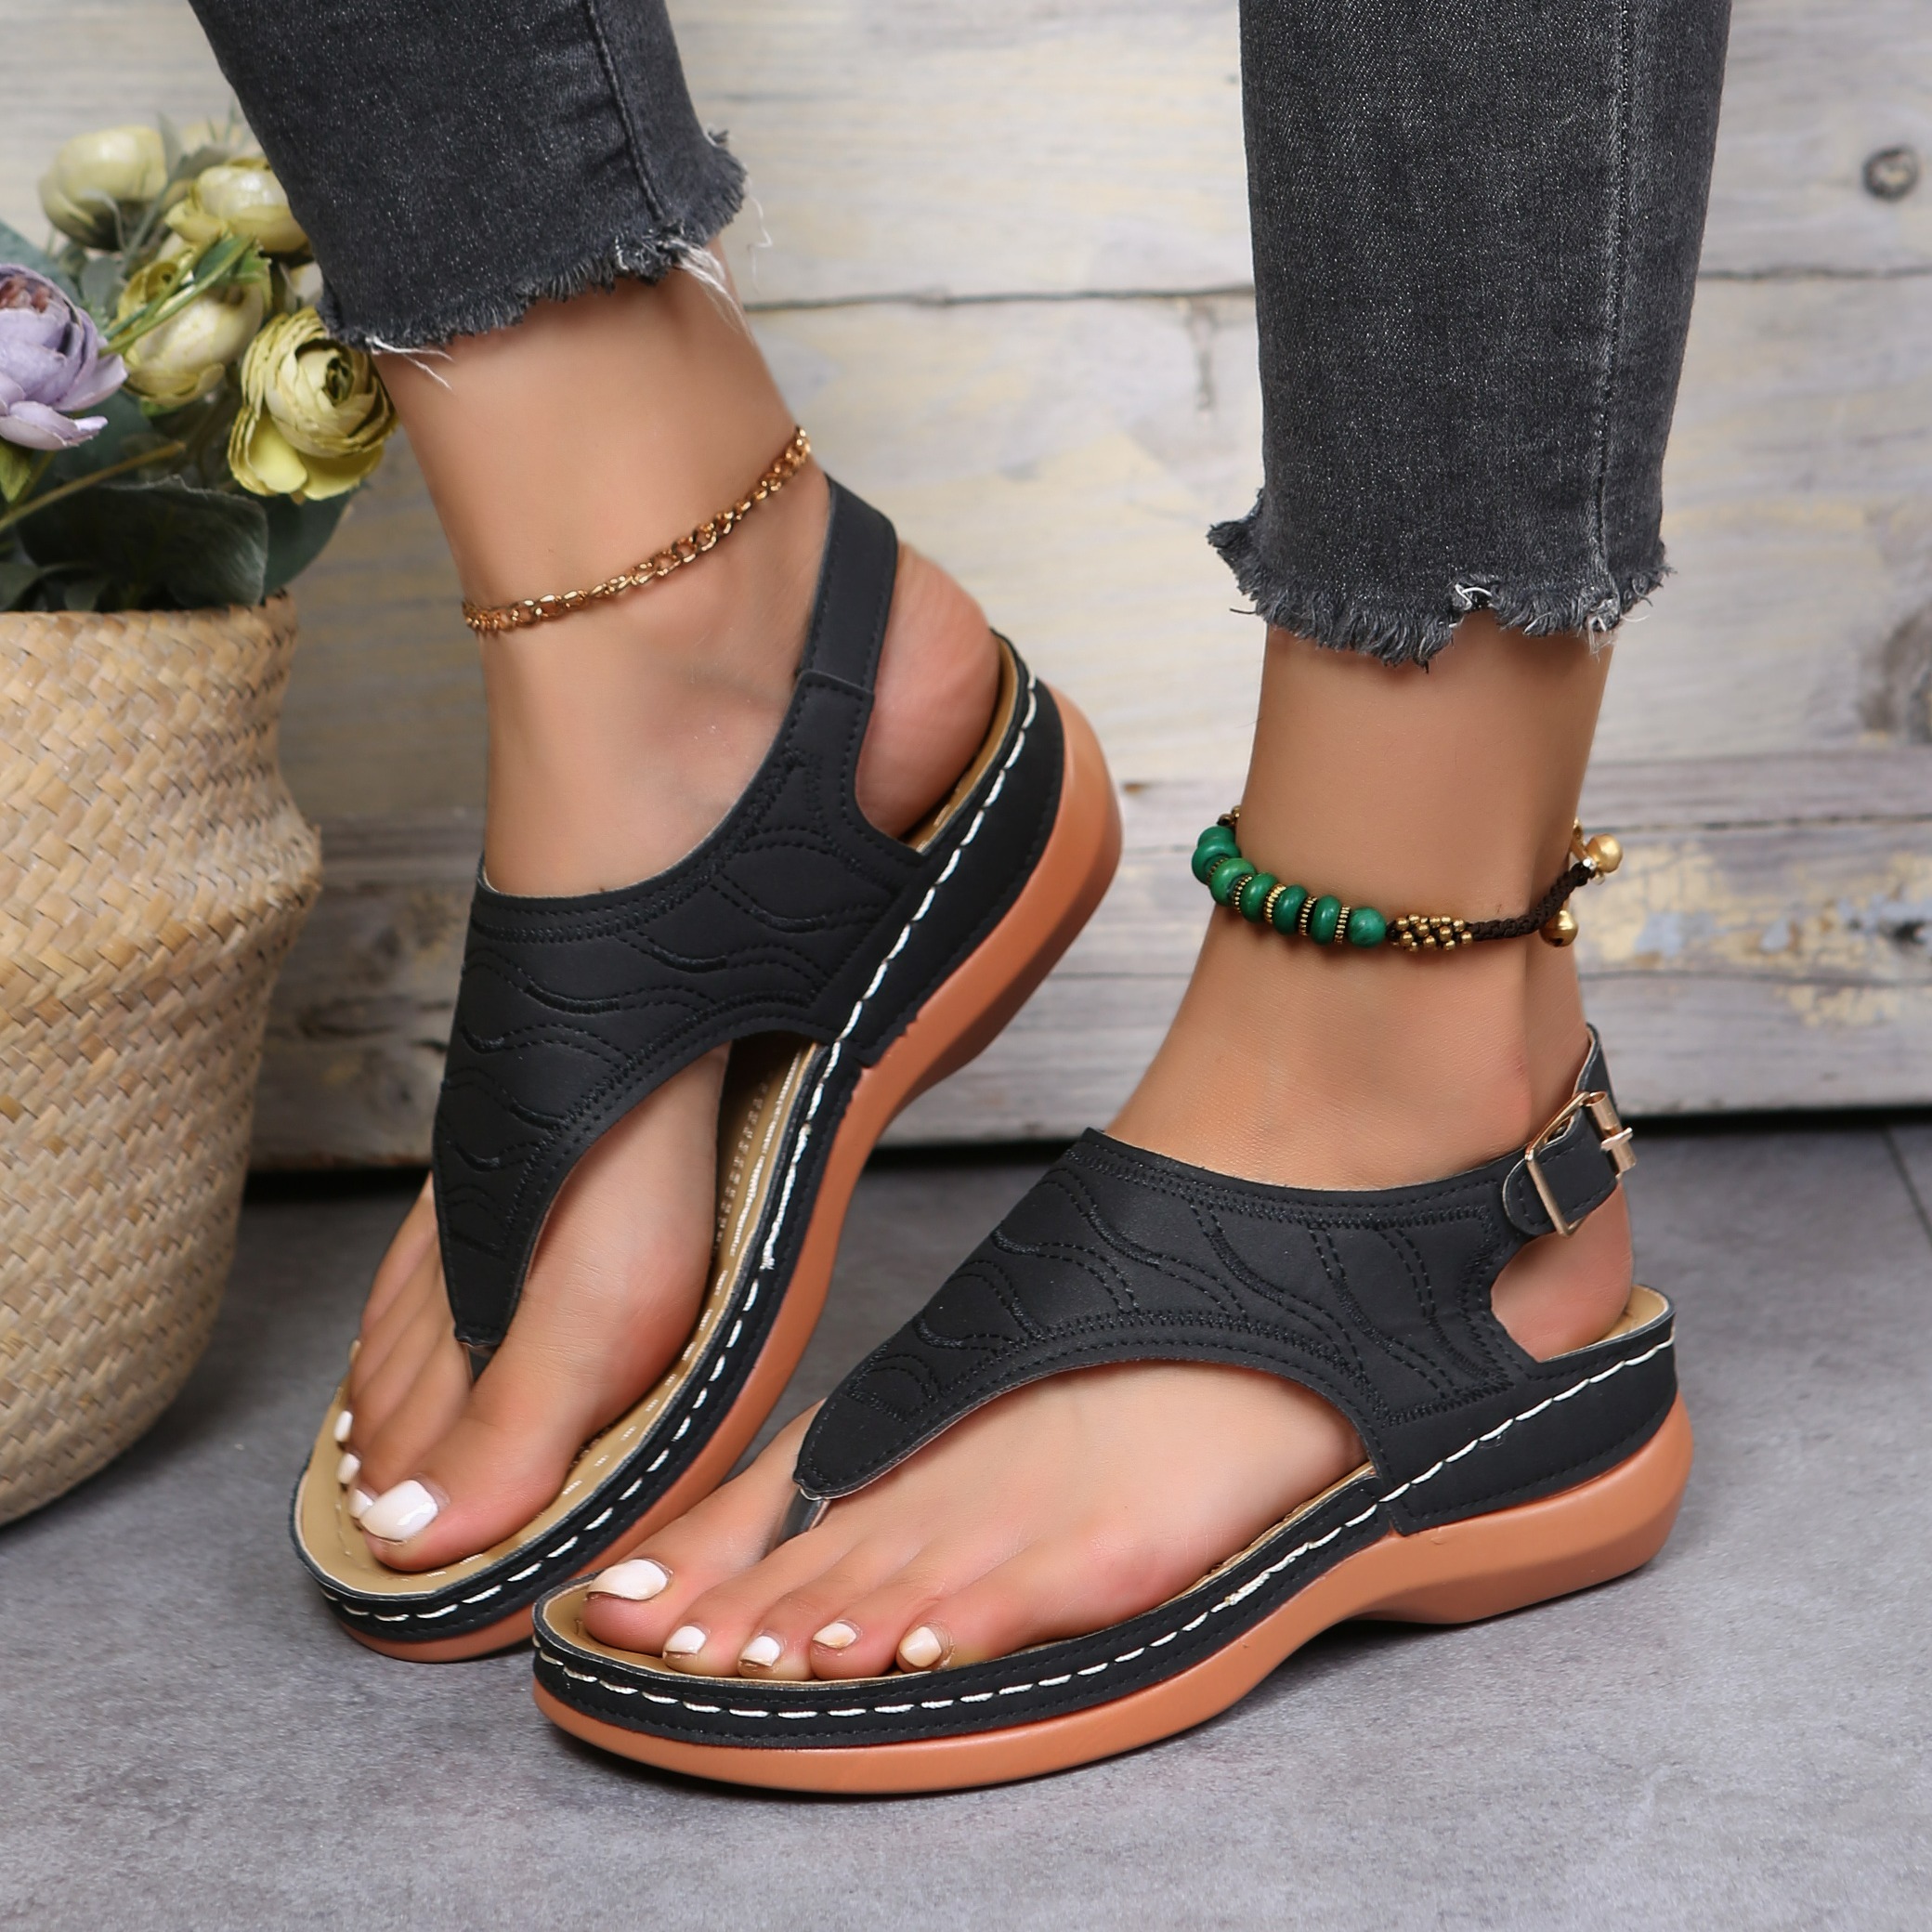 Sandals for Women Size 8 Ladies Fashion Solid Color Leather Flip Flops All  Casual Buckle Flat Sandals (Black, 6.5)